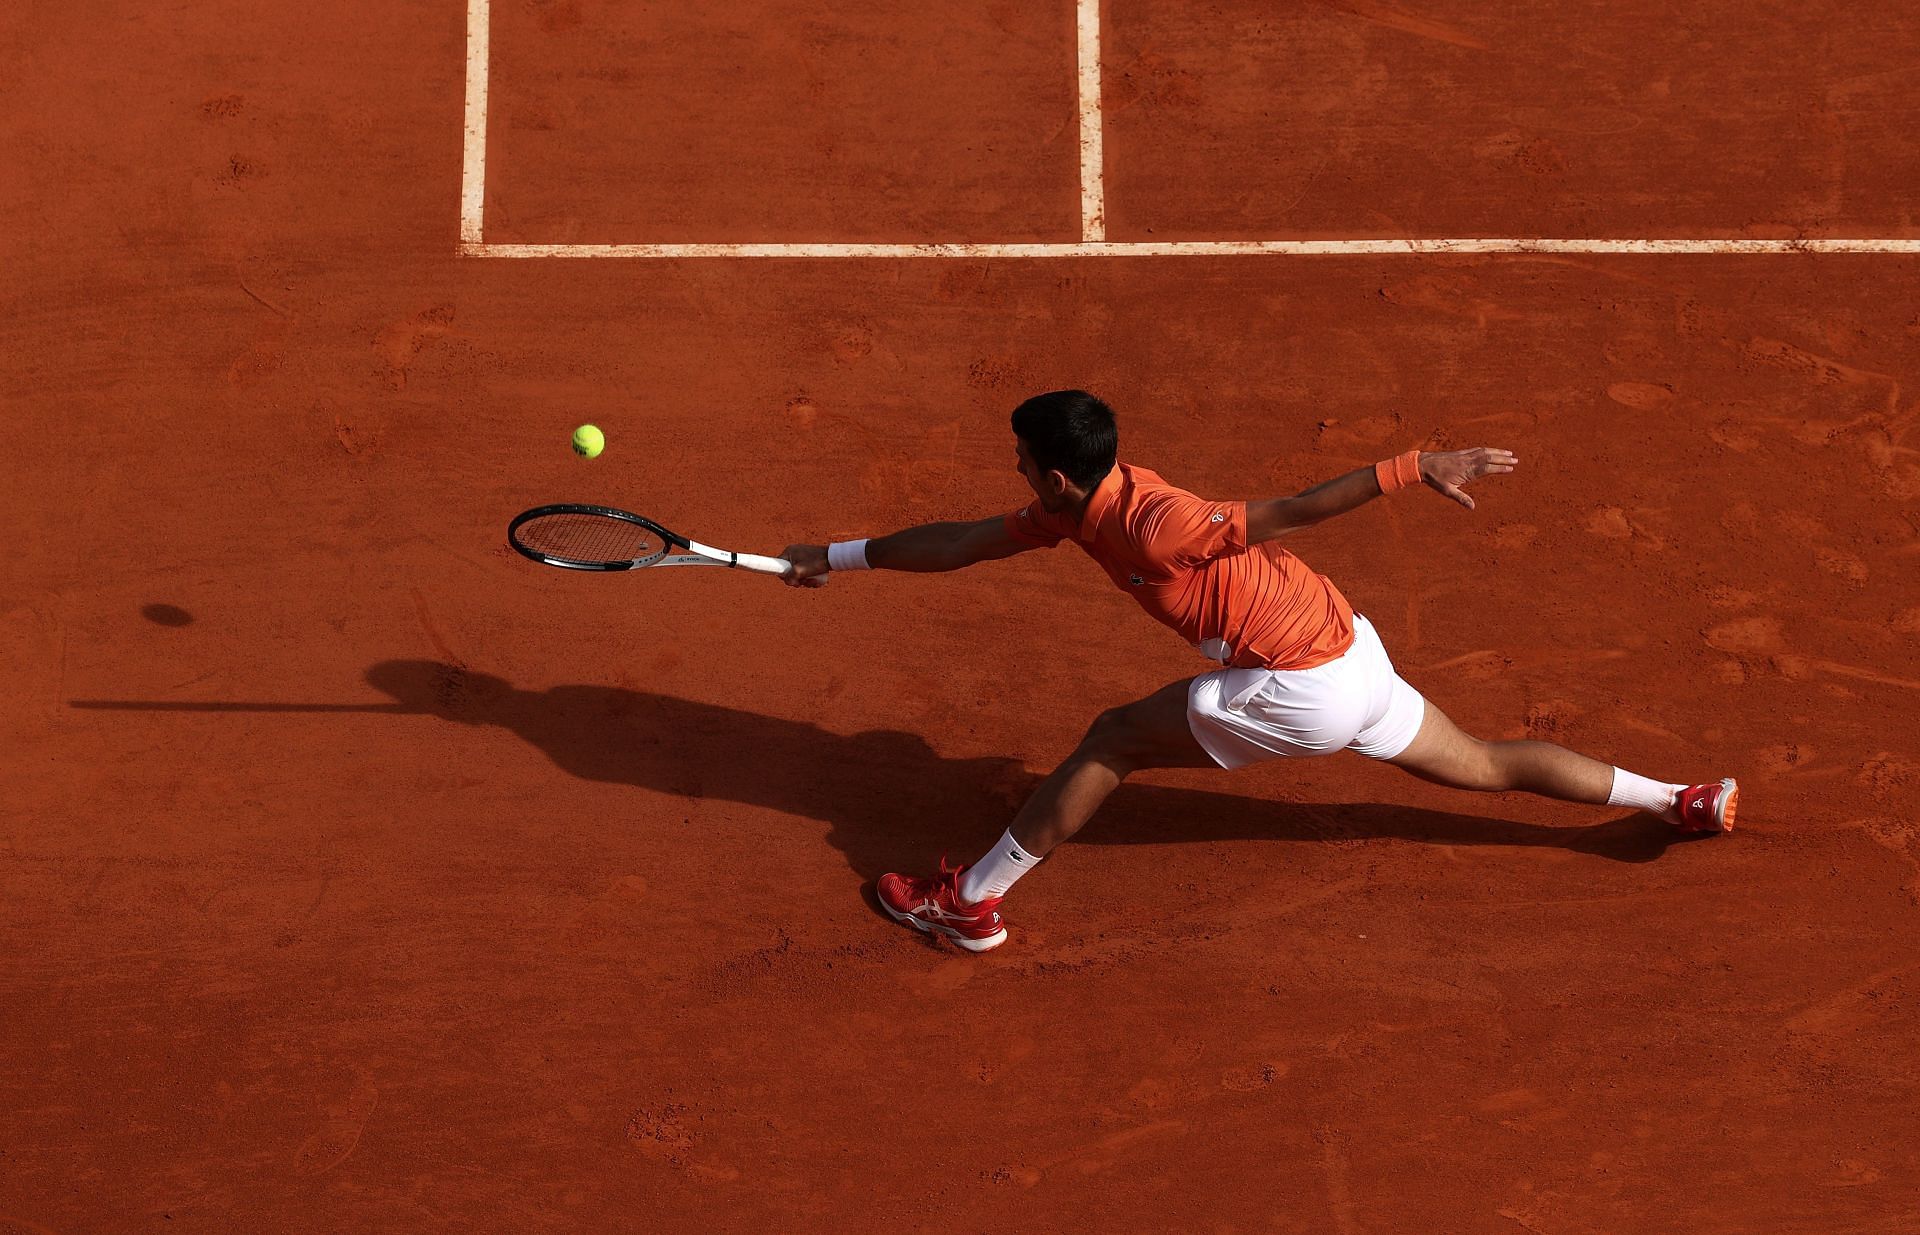 Novak Djokovic looks to defend his titles in the next two majors.